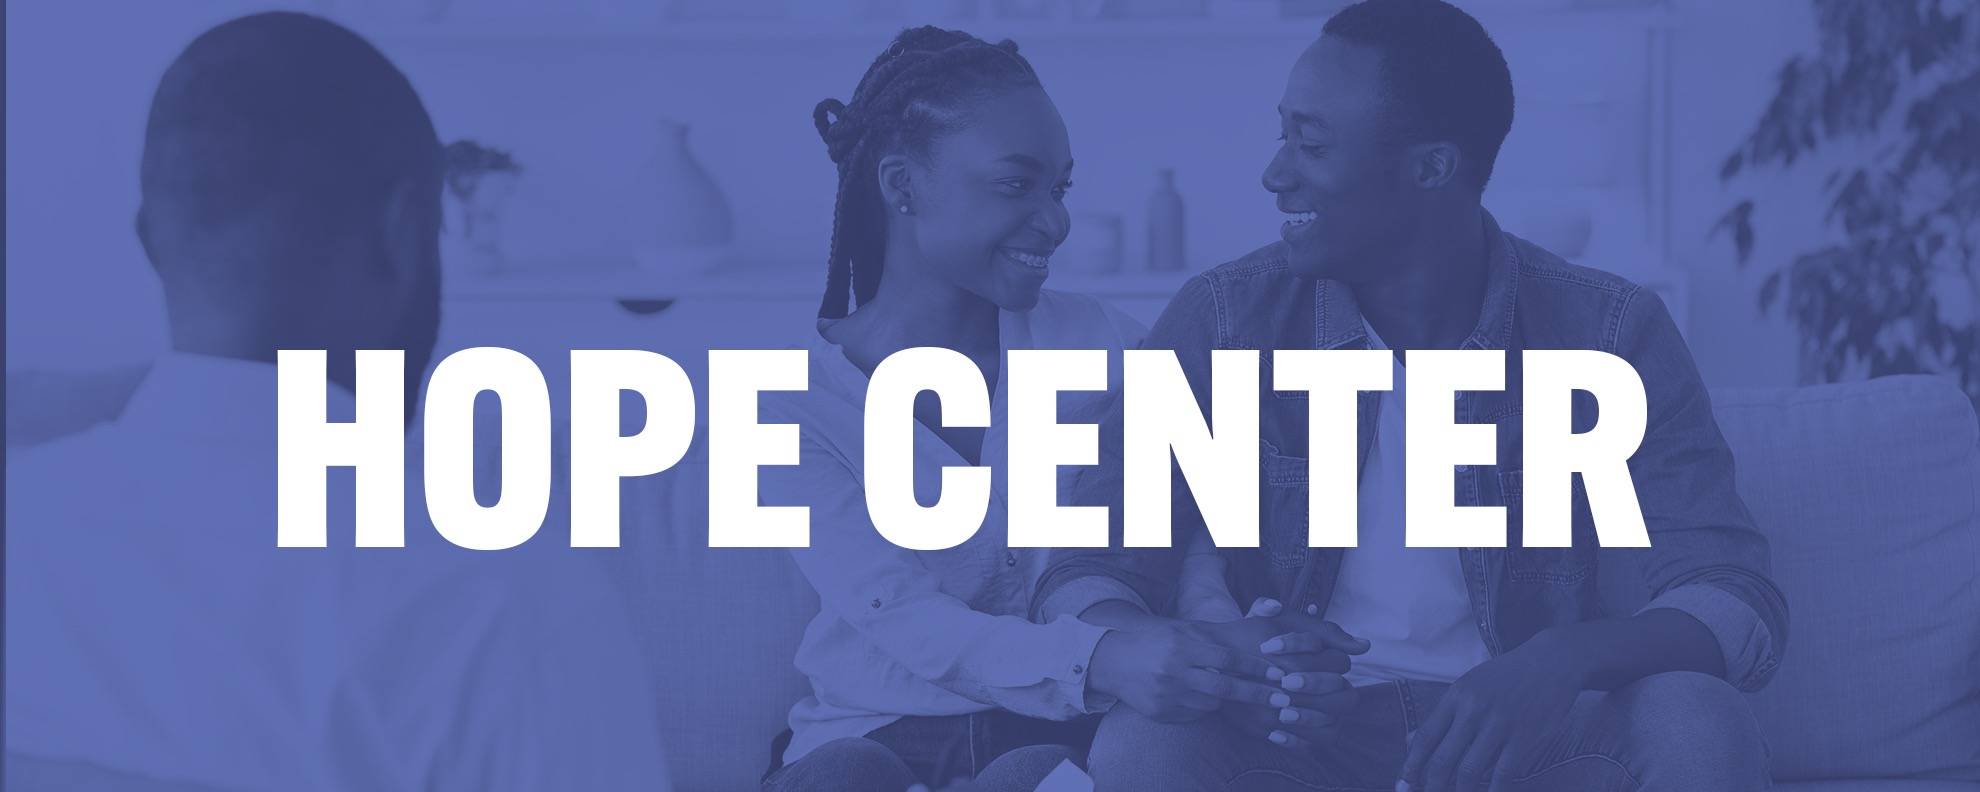 Hope Center Crisis Counseling